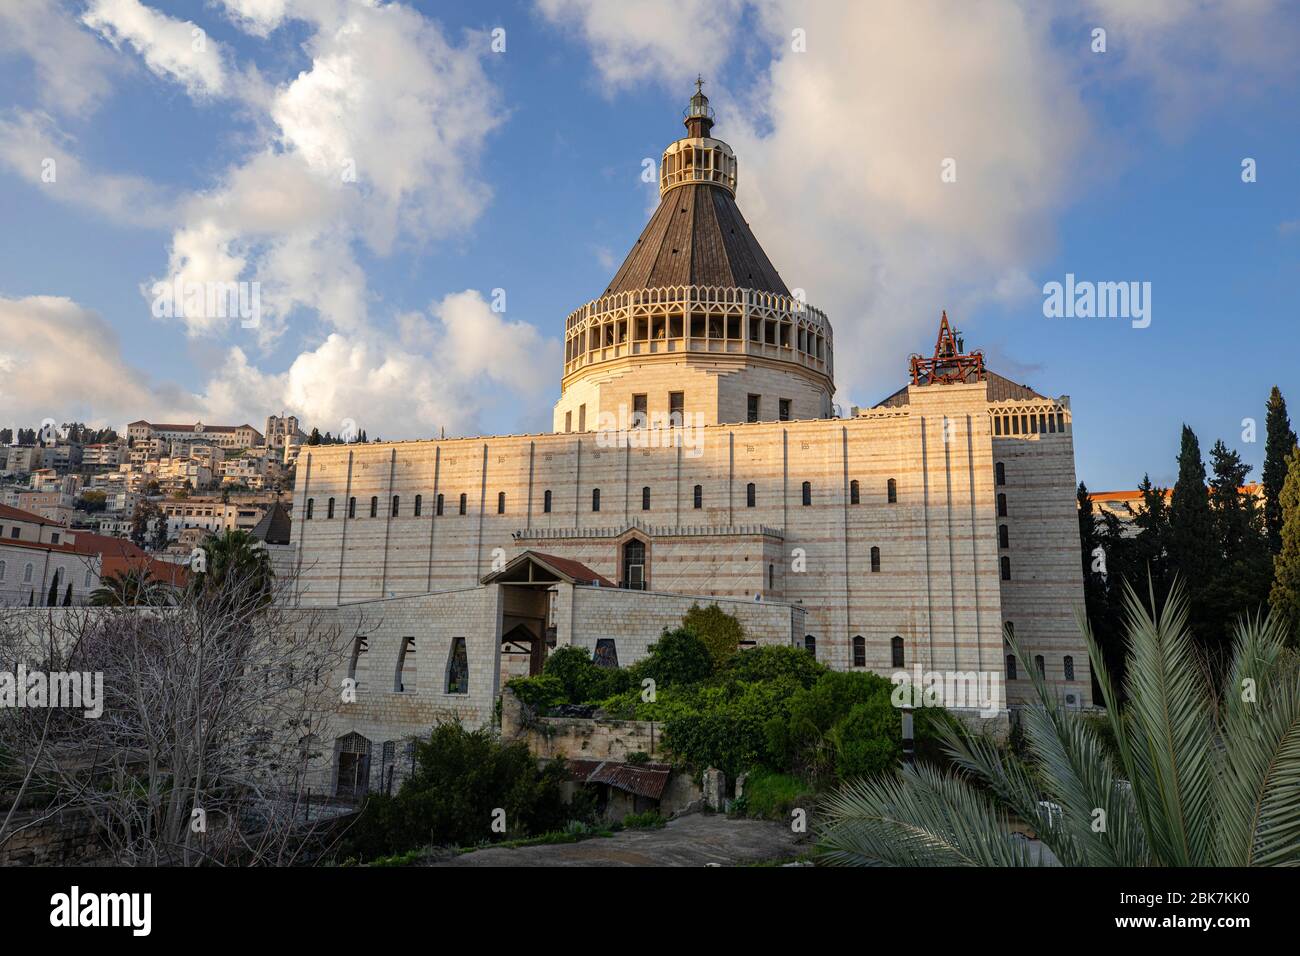 Basilica of Our Lady of the Annunciation in Nazareth, Israel Stock Photo